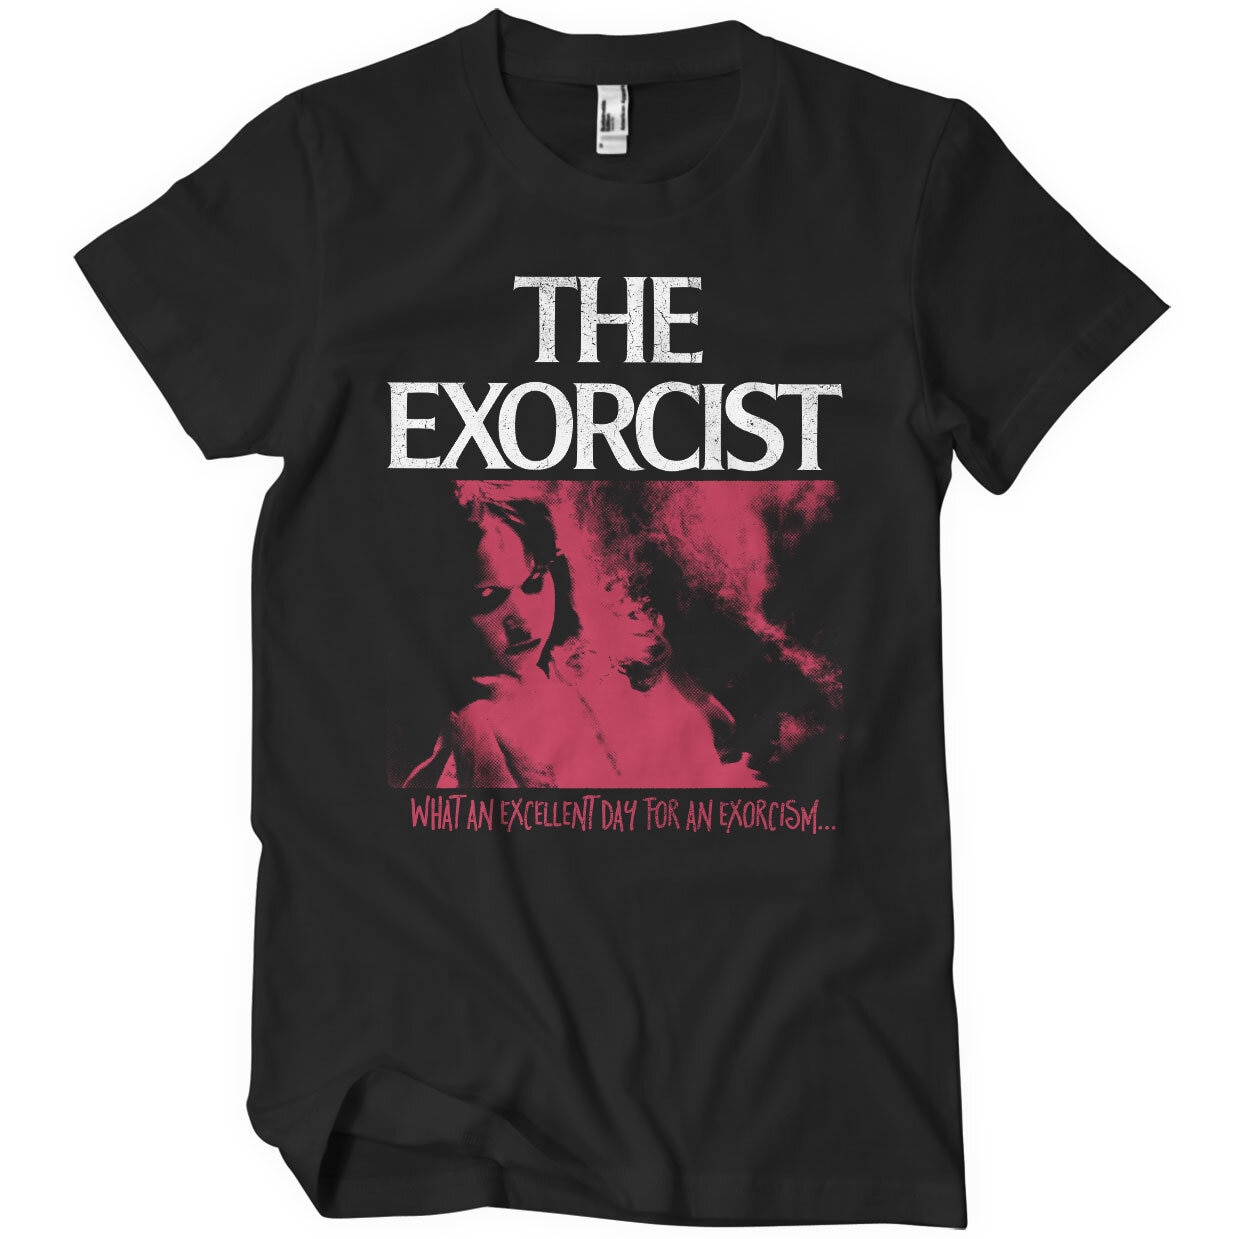 The Exorcist - Excellent Day T-Shirt